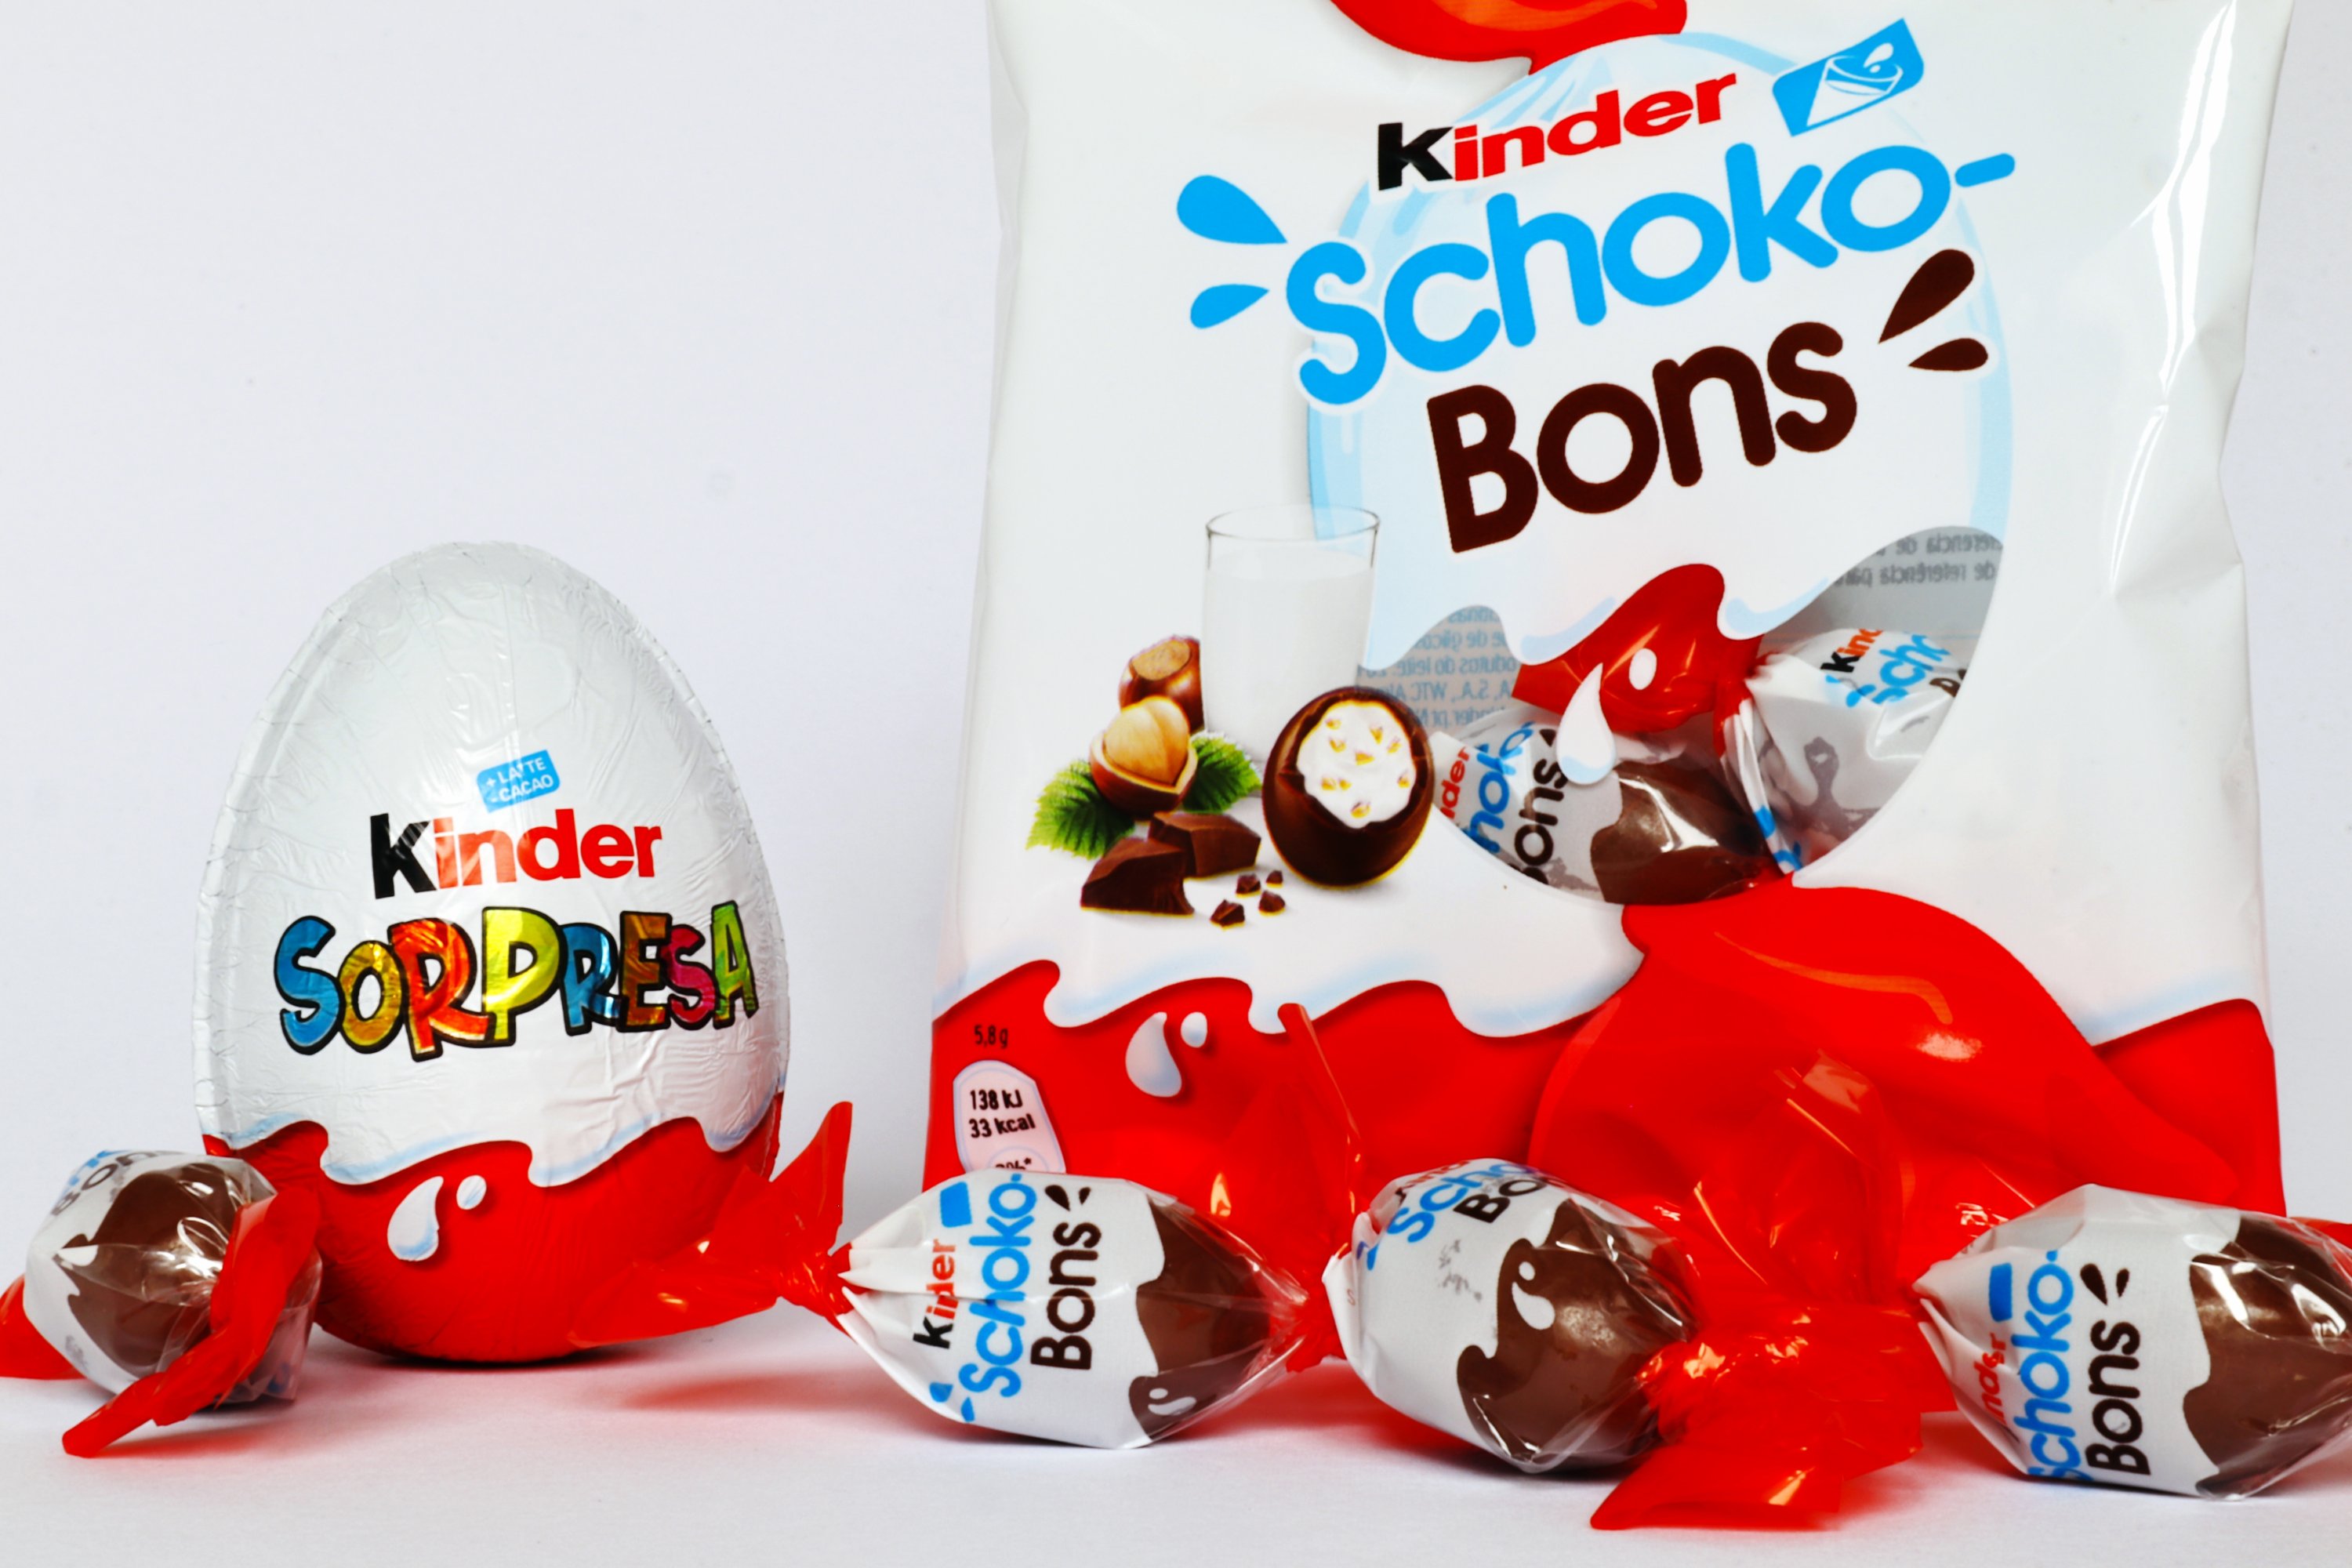 Turkish ministry recalls Kinder products over salmonella fears